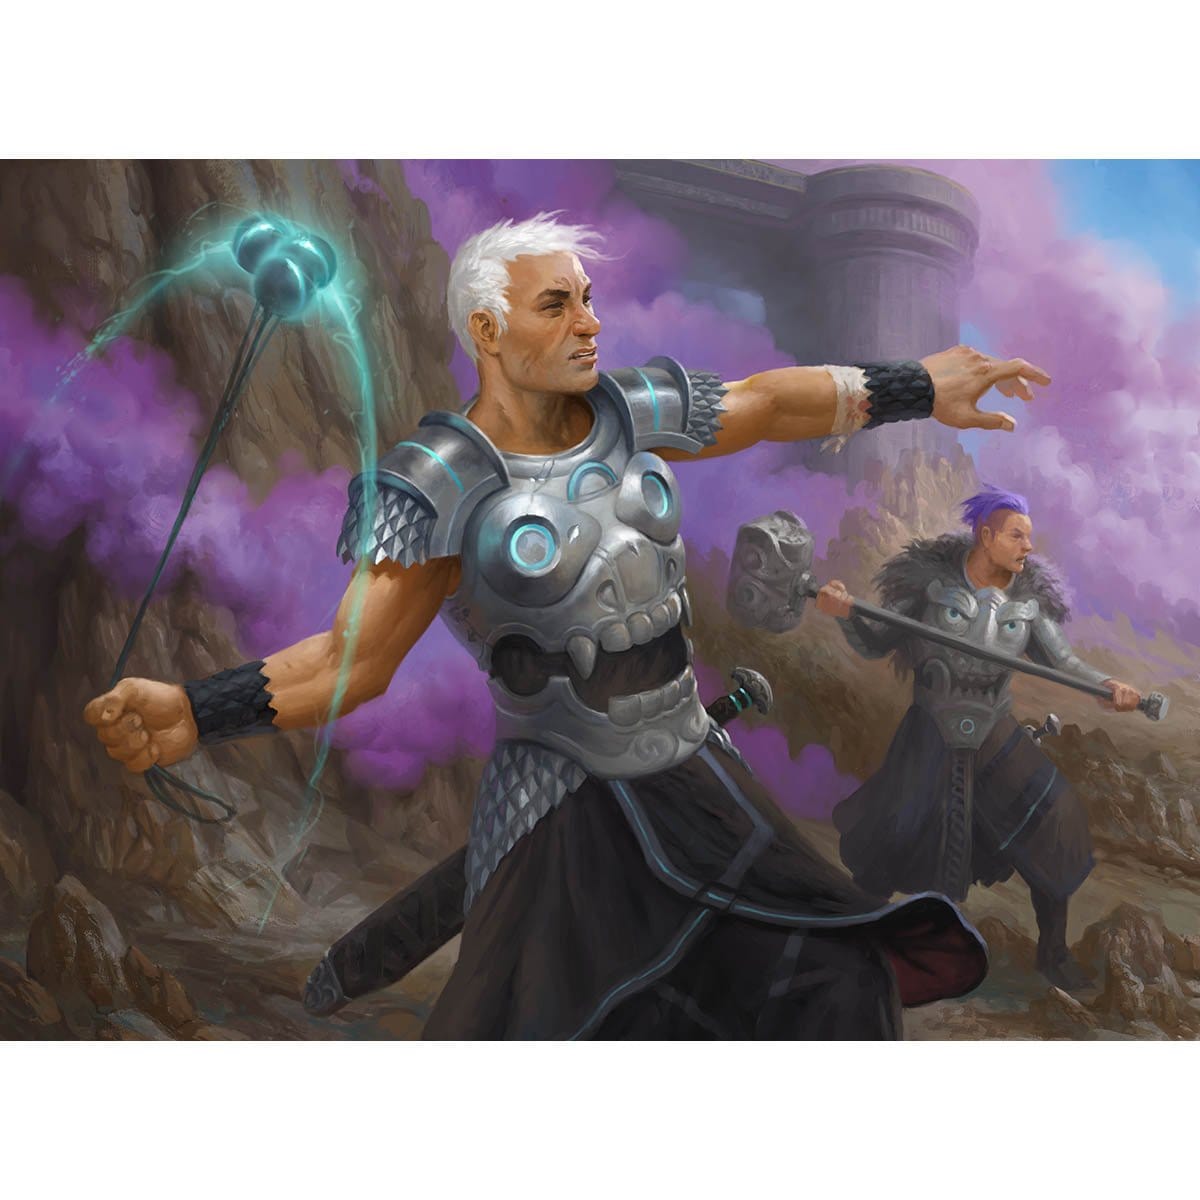 Proud Mentor Print - Print - Original Magic Art - Accessories for Magic the Gathering and other card games